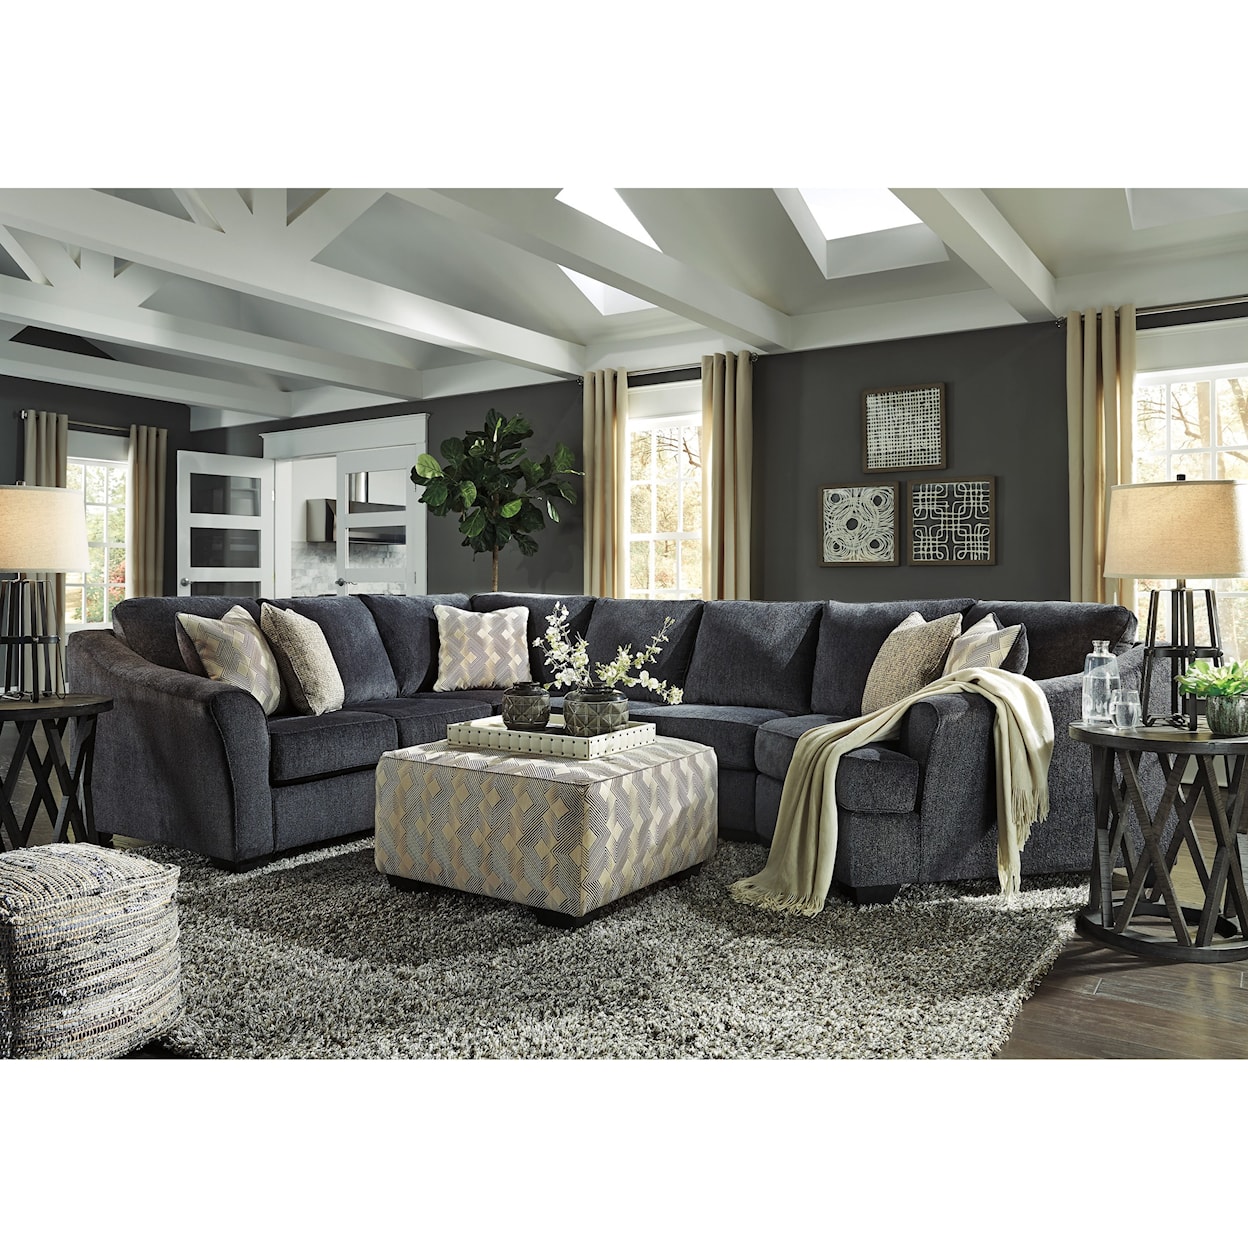 Signature Design by Ashley Eltmann Stationary Living Room Group